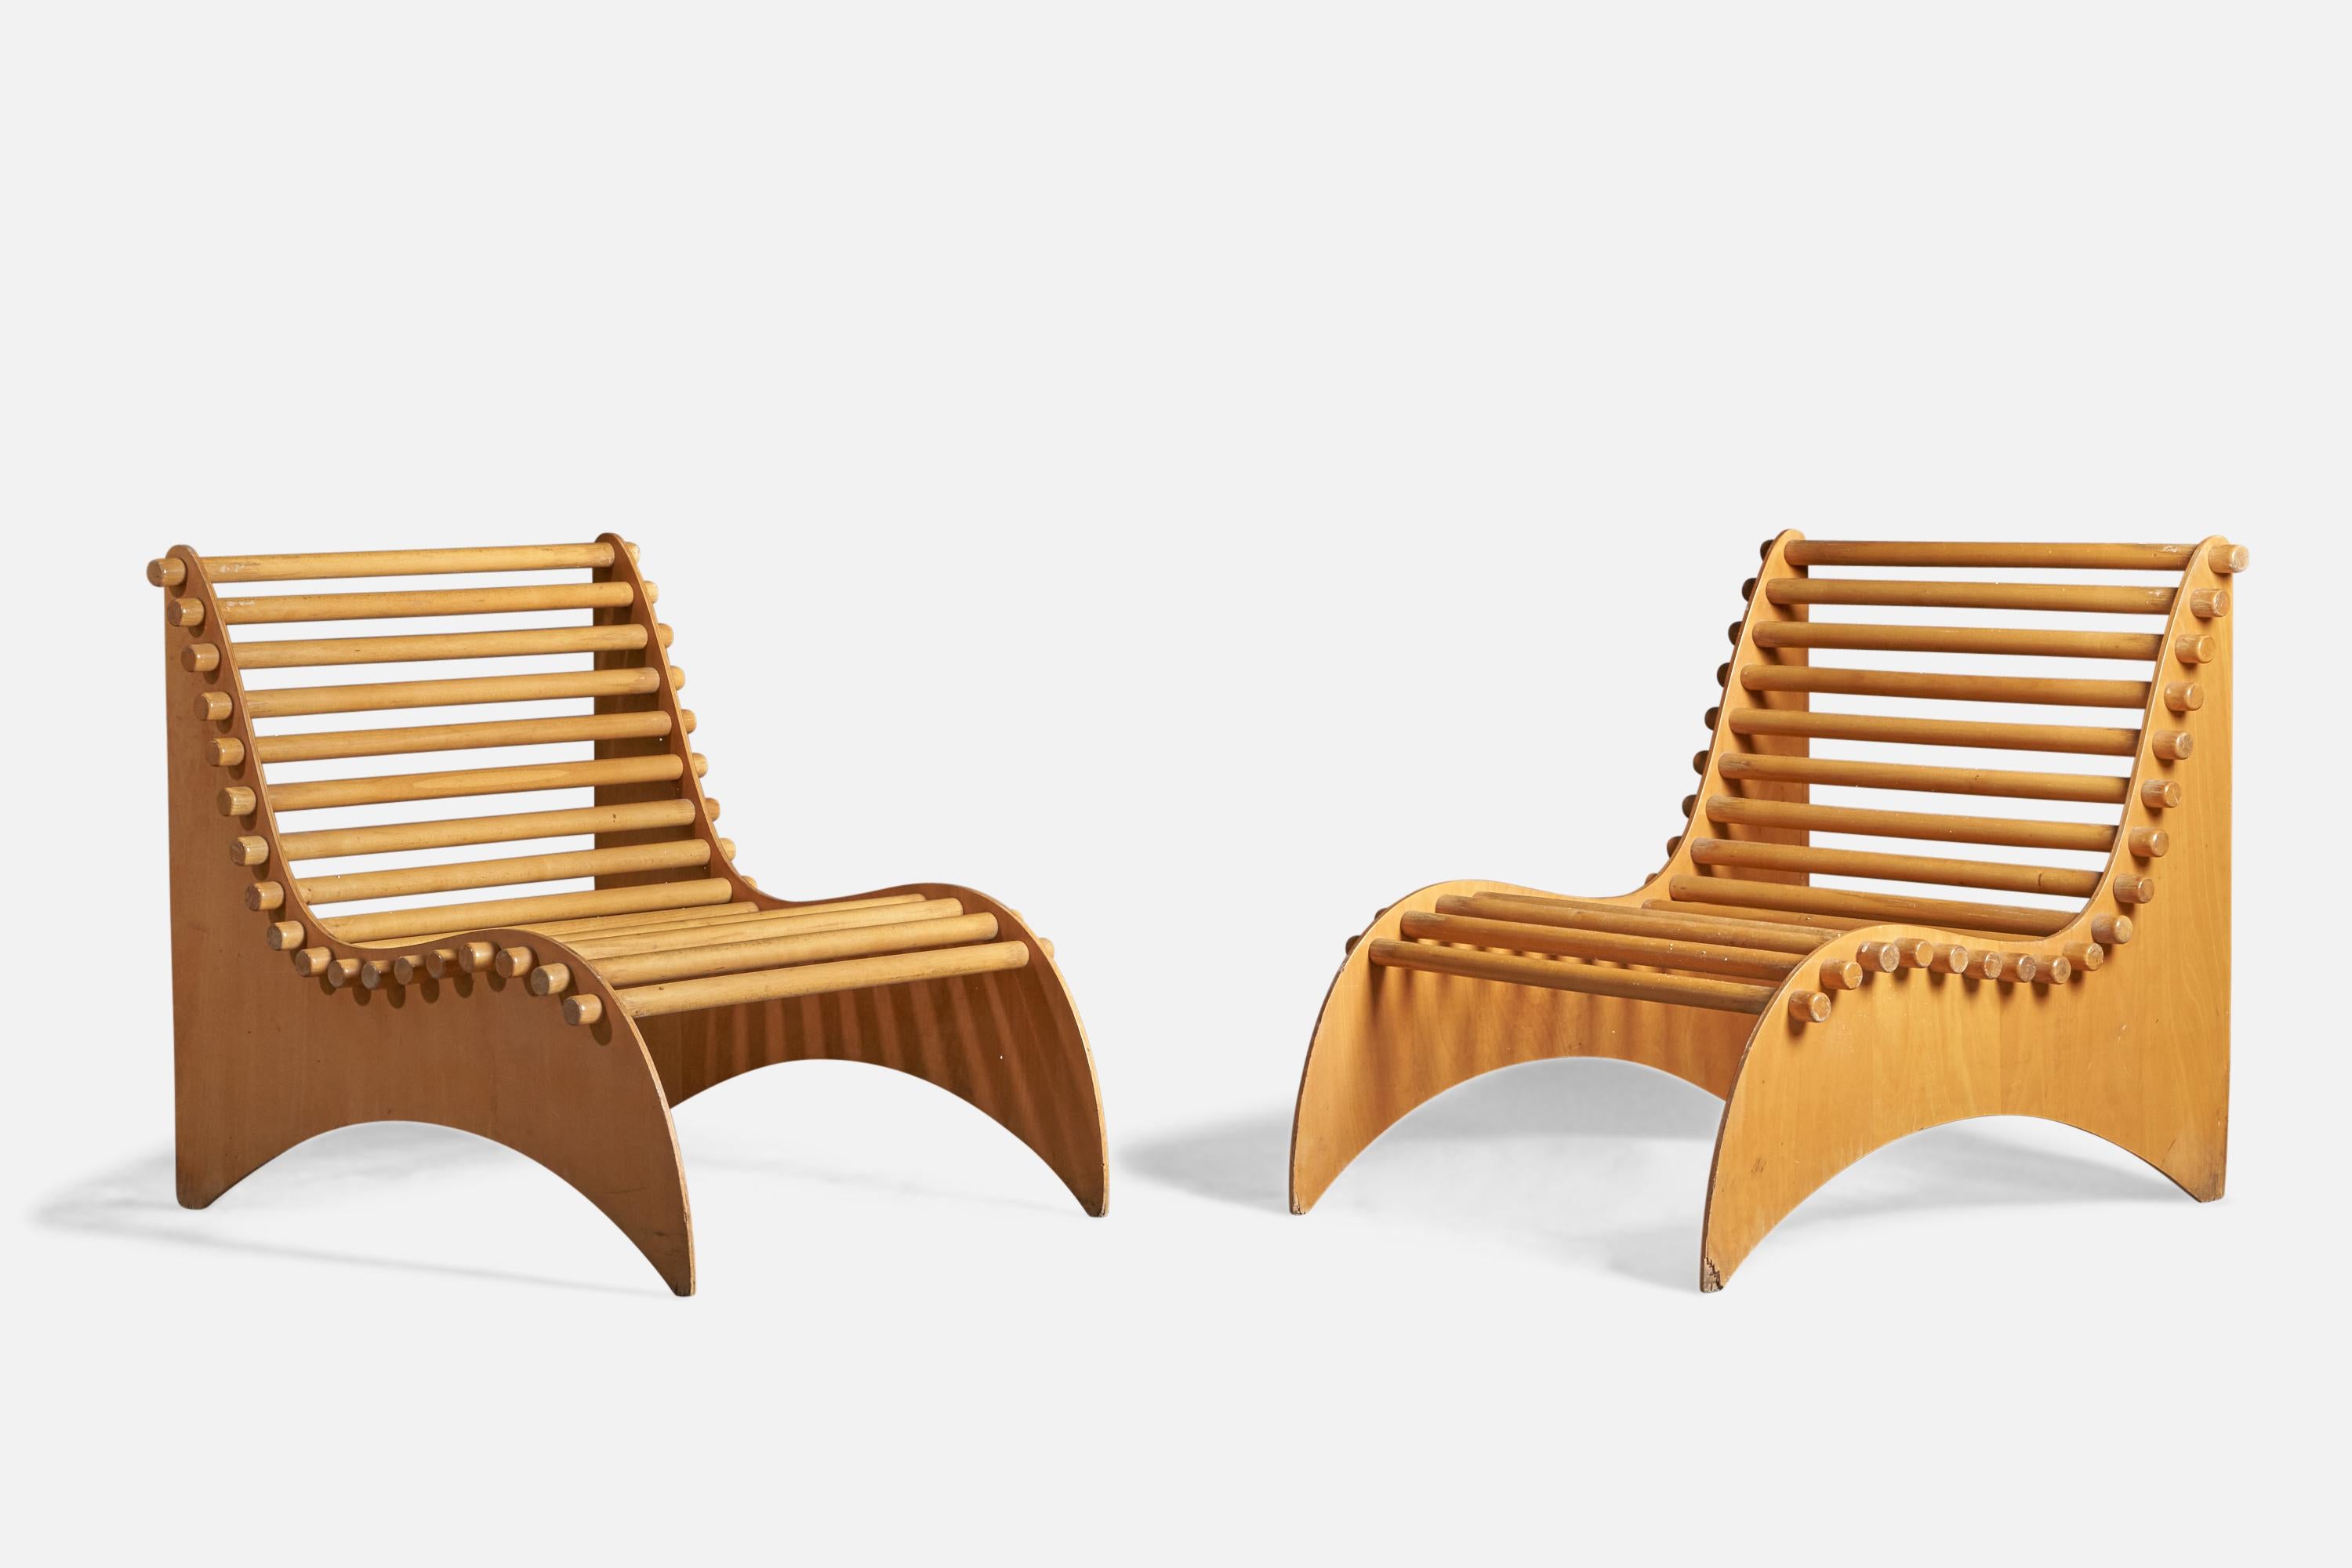 A pair of plywood and solid wood lounge chairs or slipper chairs, designed and produced in Italy, c. 1960s

14.75